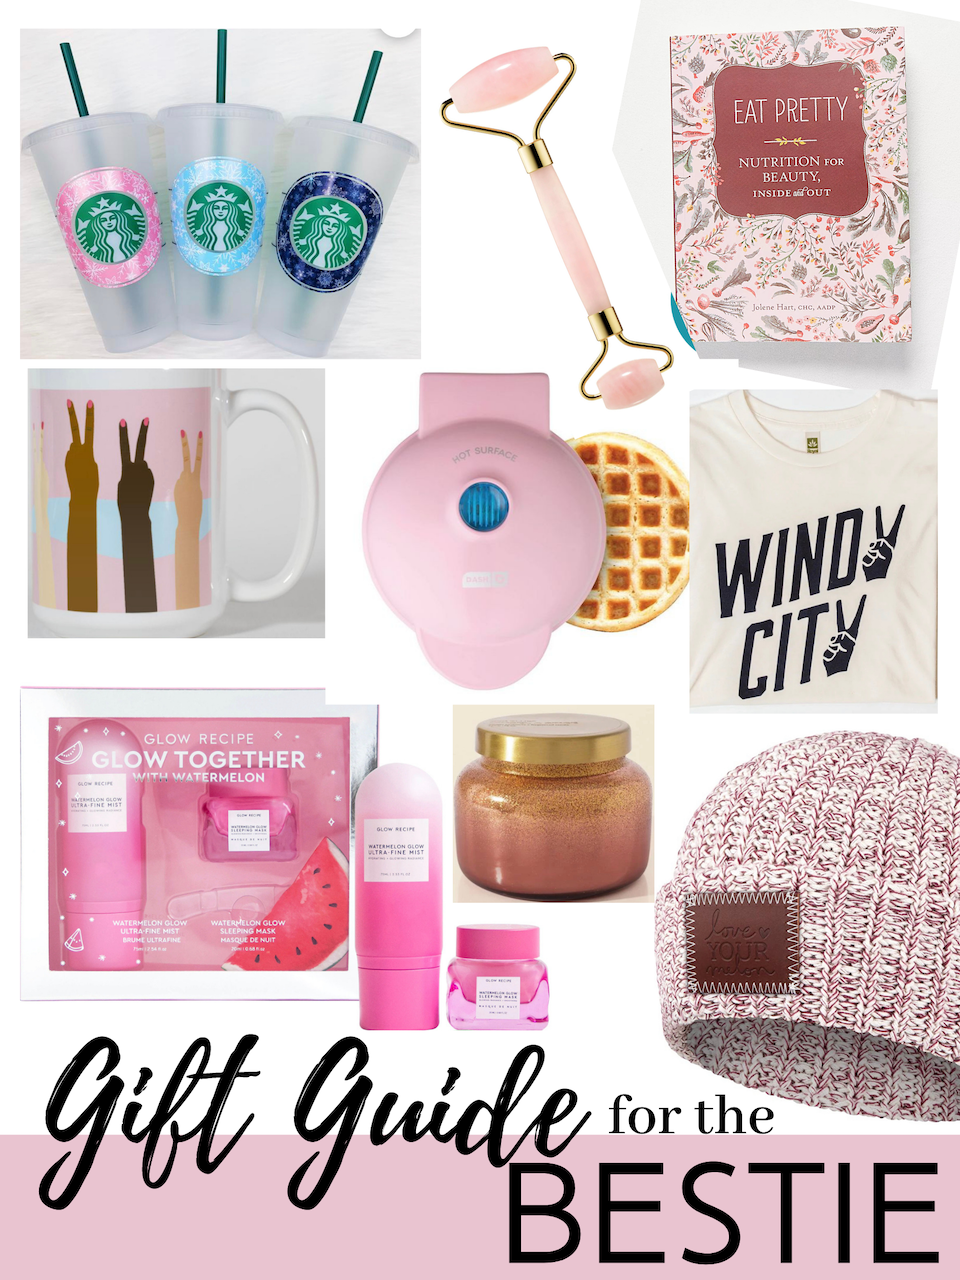 holiday gift guide for the: BESTIE